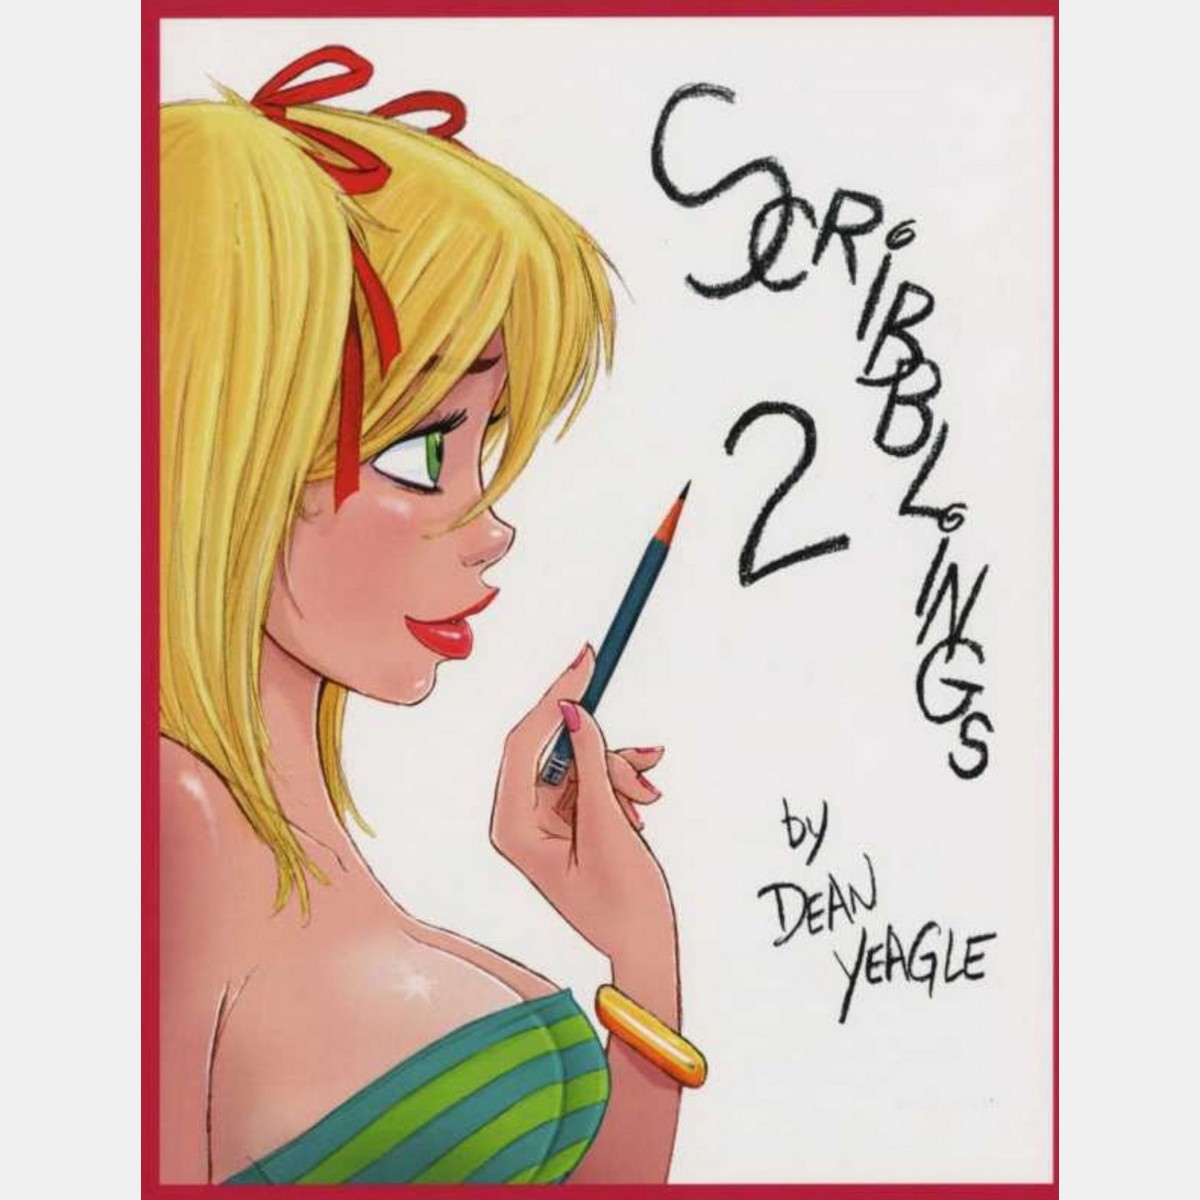 Dean Yeagle - Scribblings 2 - Signed